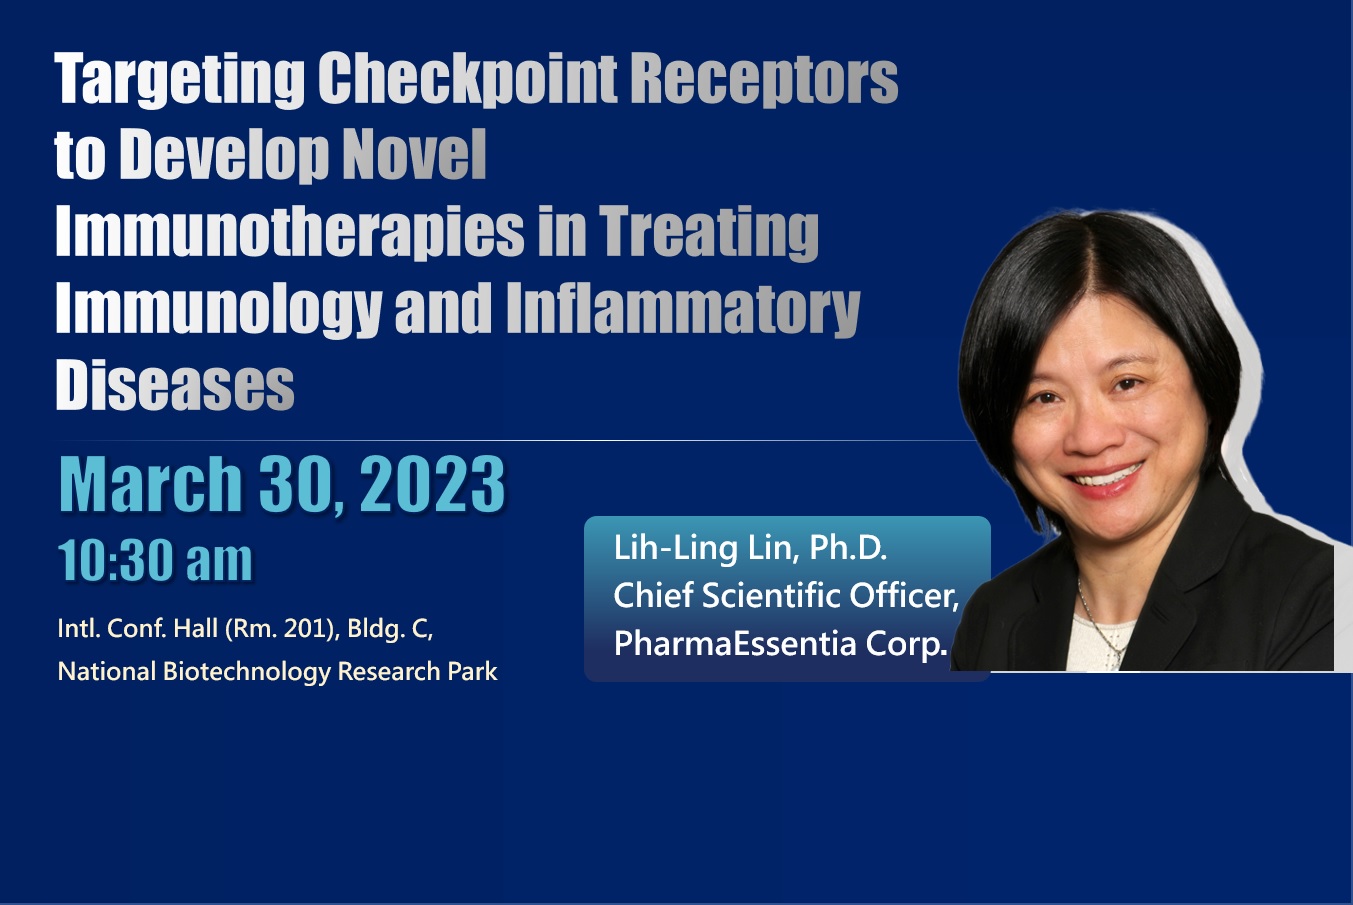 Targeting Checkpoint Receptors to Develop Novel Immunotherapies in Treating Immunology and Inflammatory Diseases